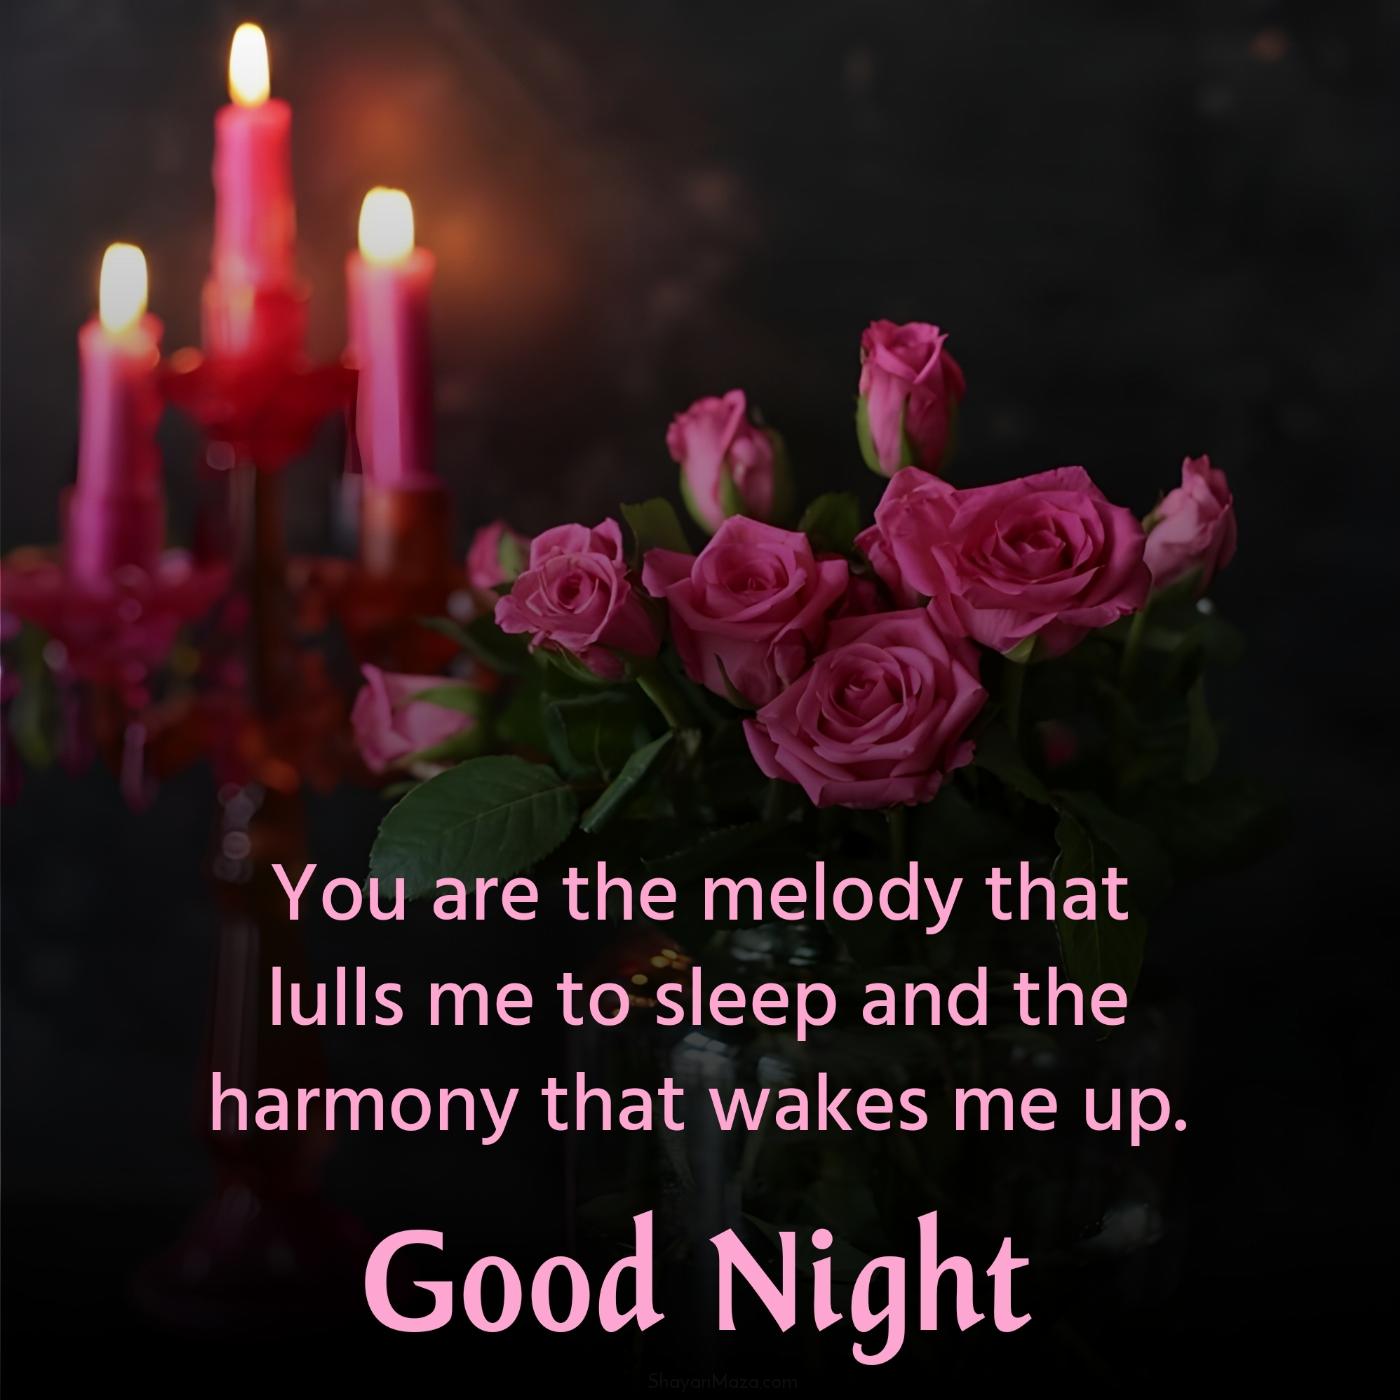 You are the melody that lulls me to sleep and the harmony